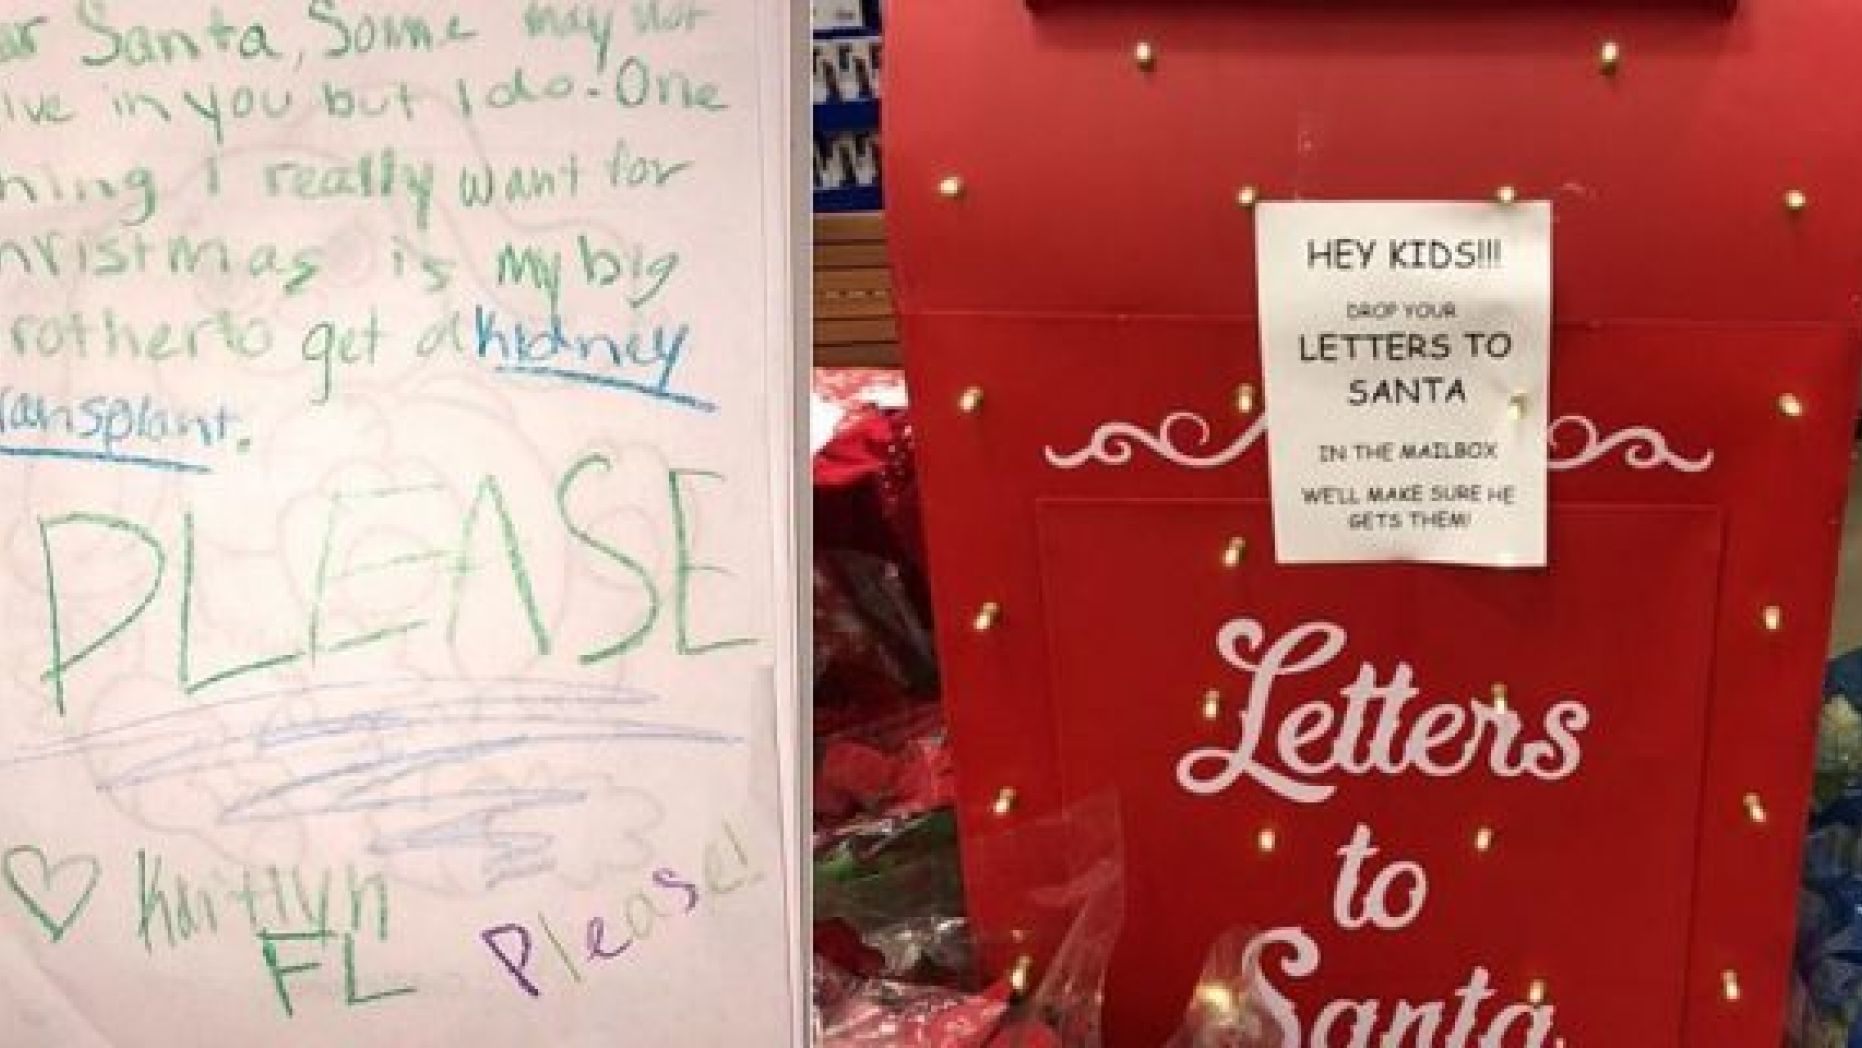 A girl wrote a letter to Santa asking for a kidney for her big brother.